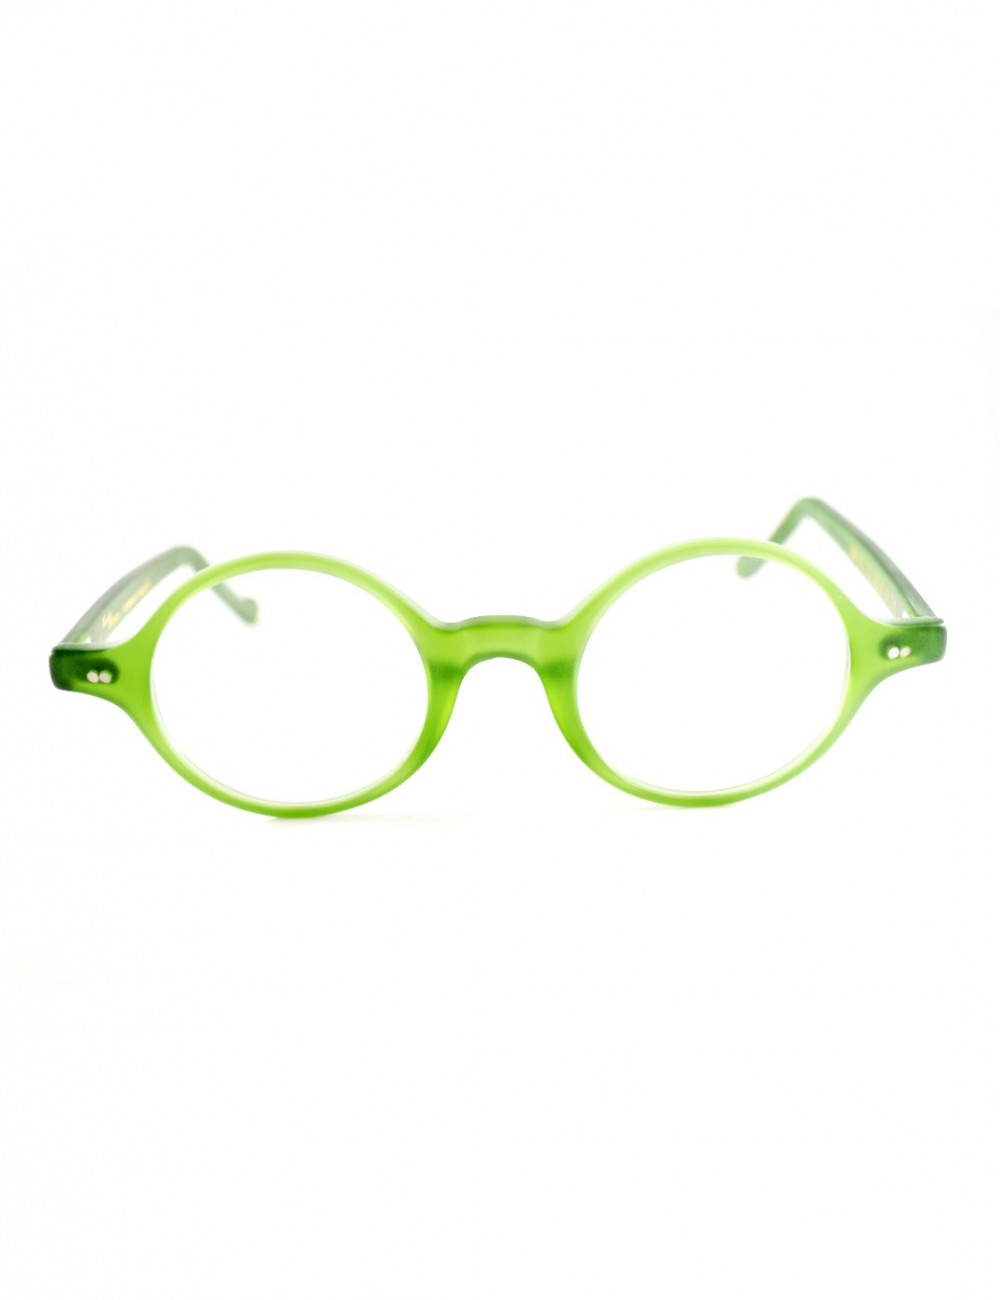 Franklo Frank Lo Ray 69-69 green matte limited edition 2/4 Shop